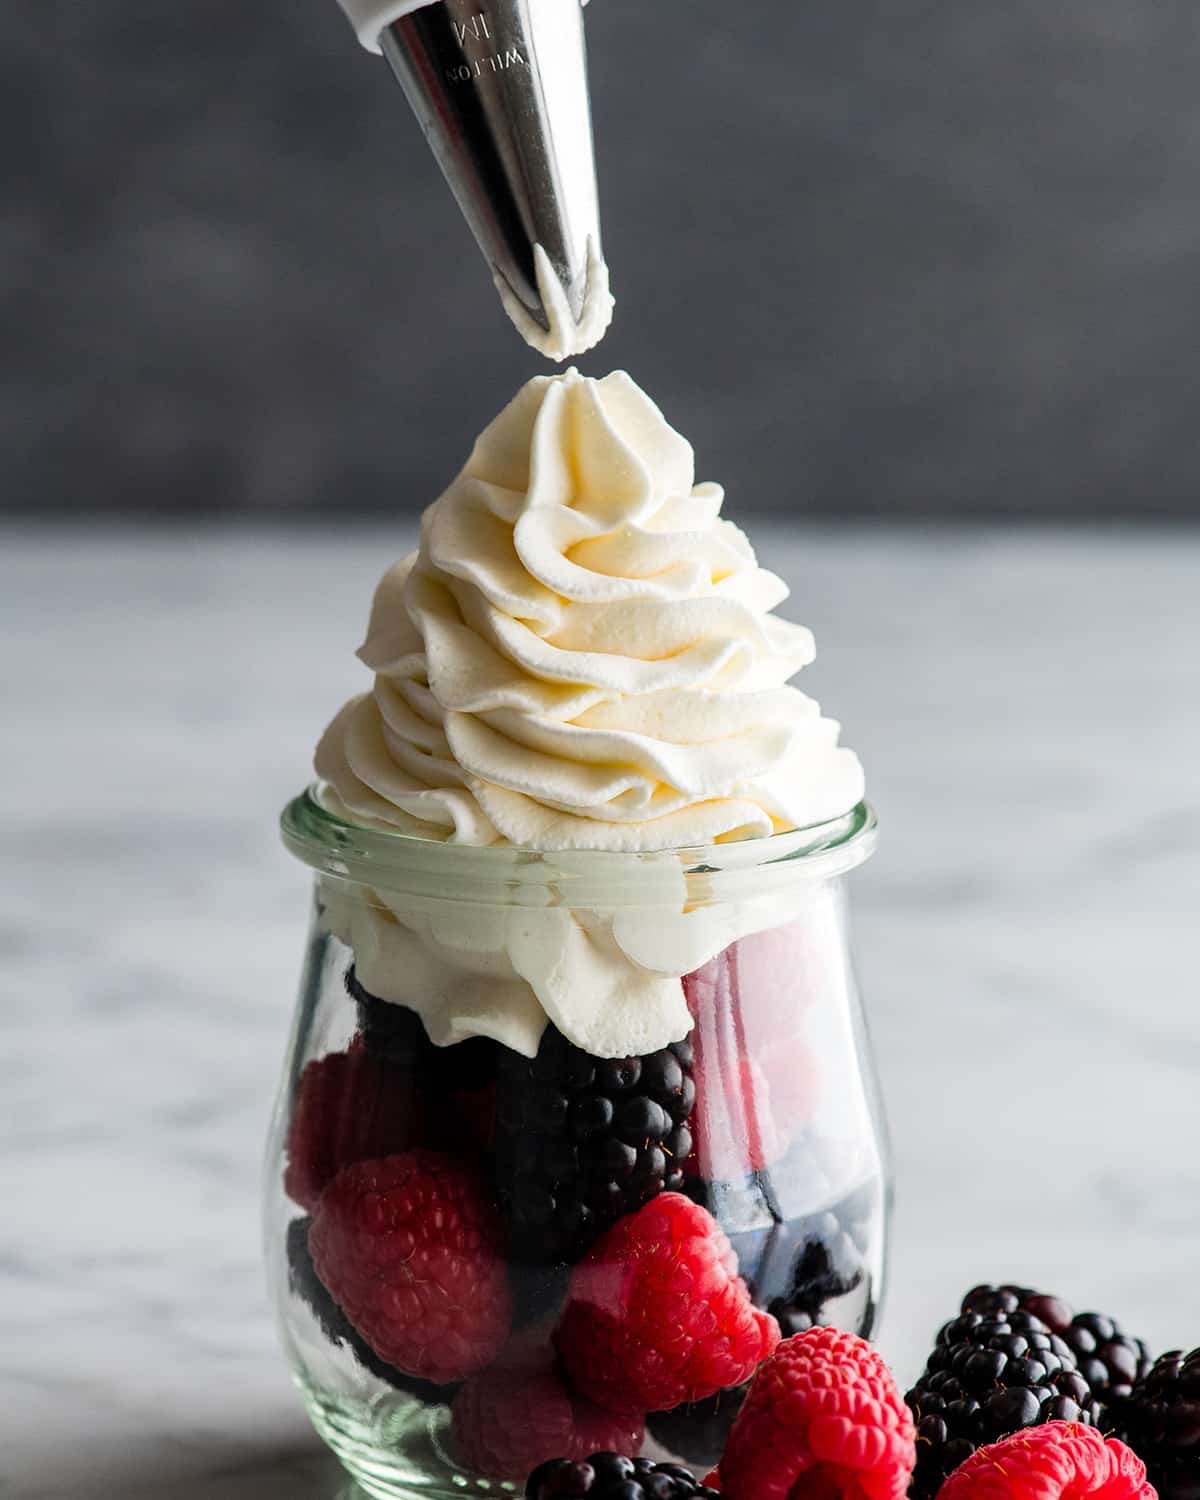 front view showing homemade whipped cream being piped over fresh berries